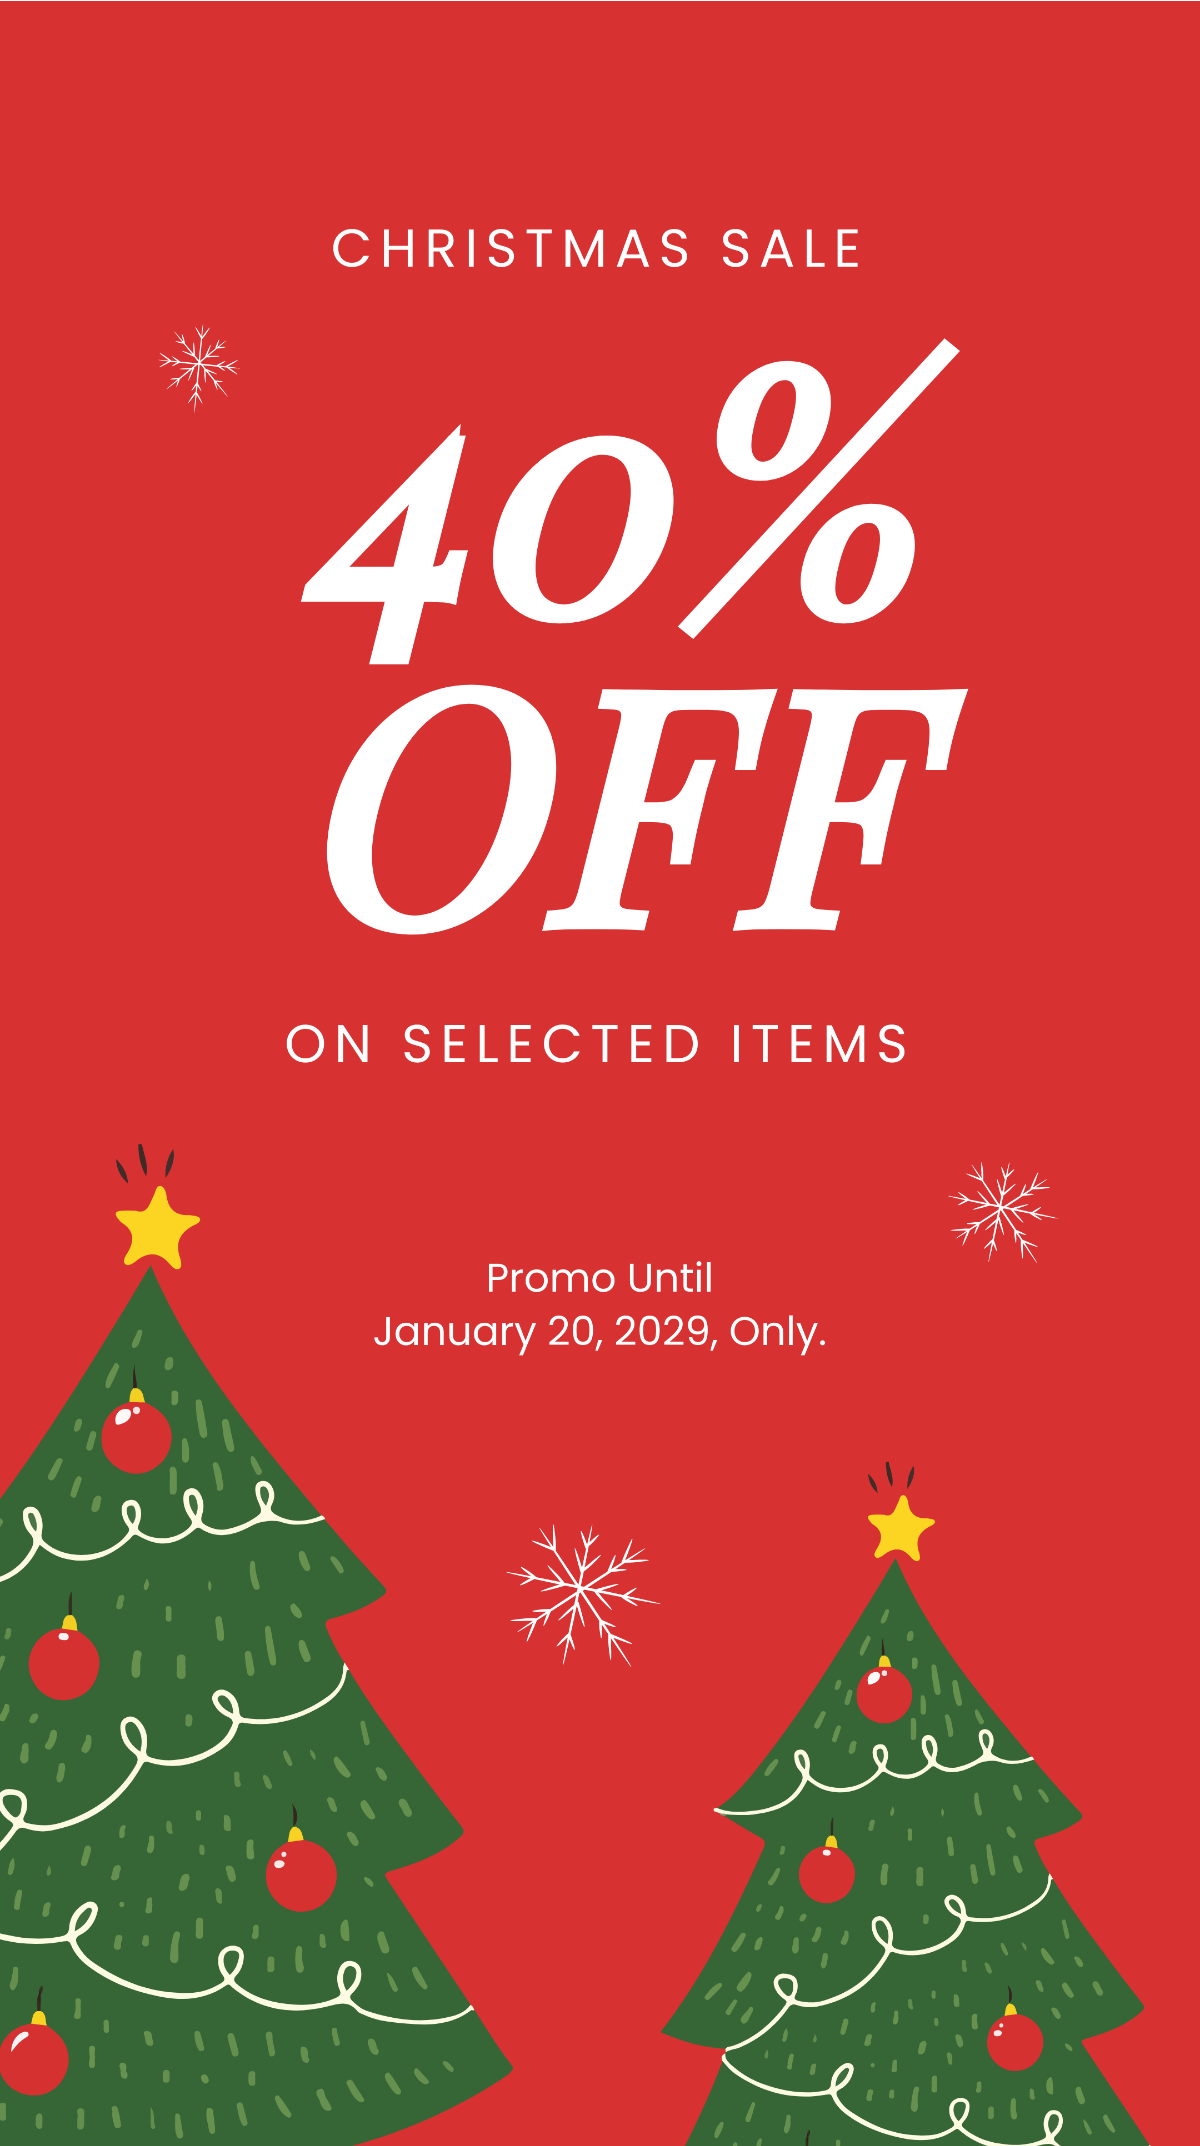 Christmas Holiday Sale Instagram Story Template